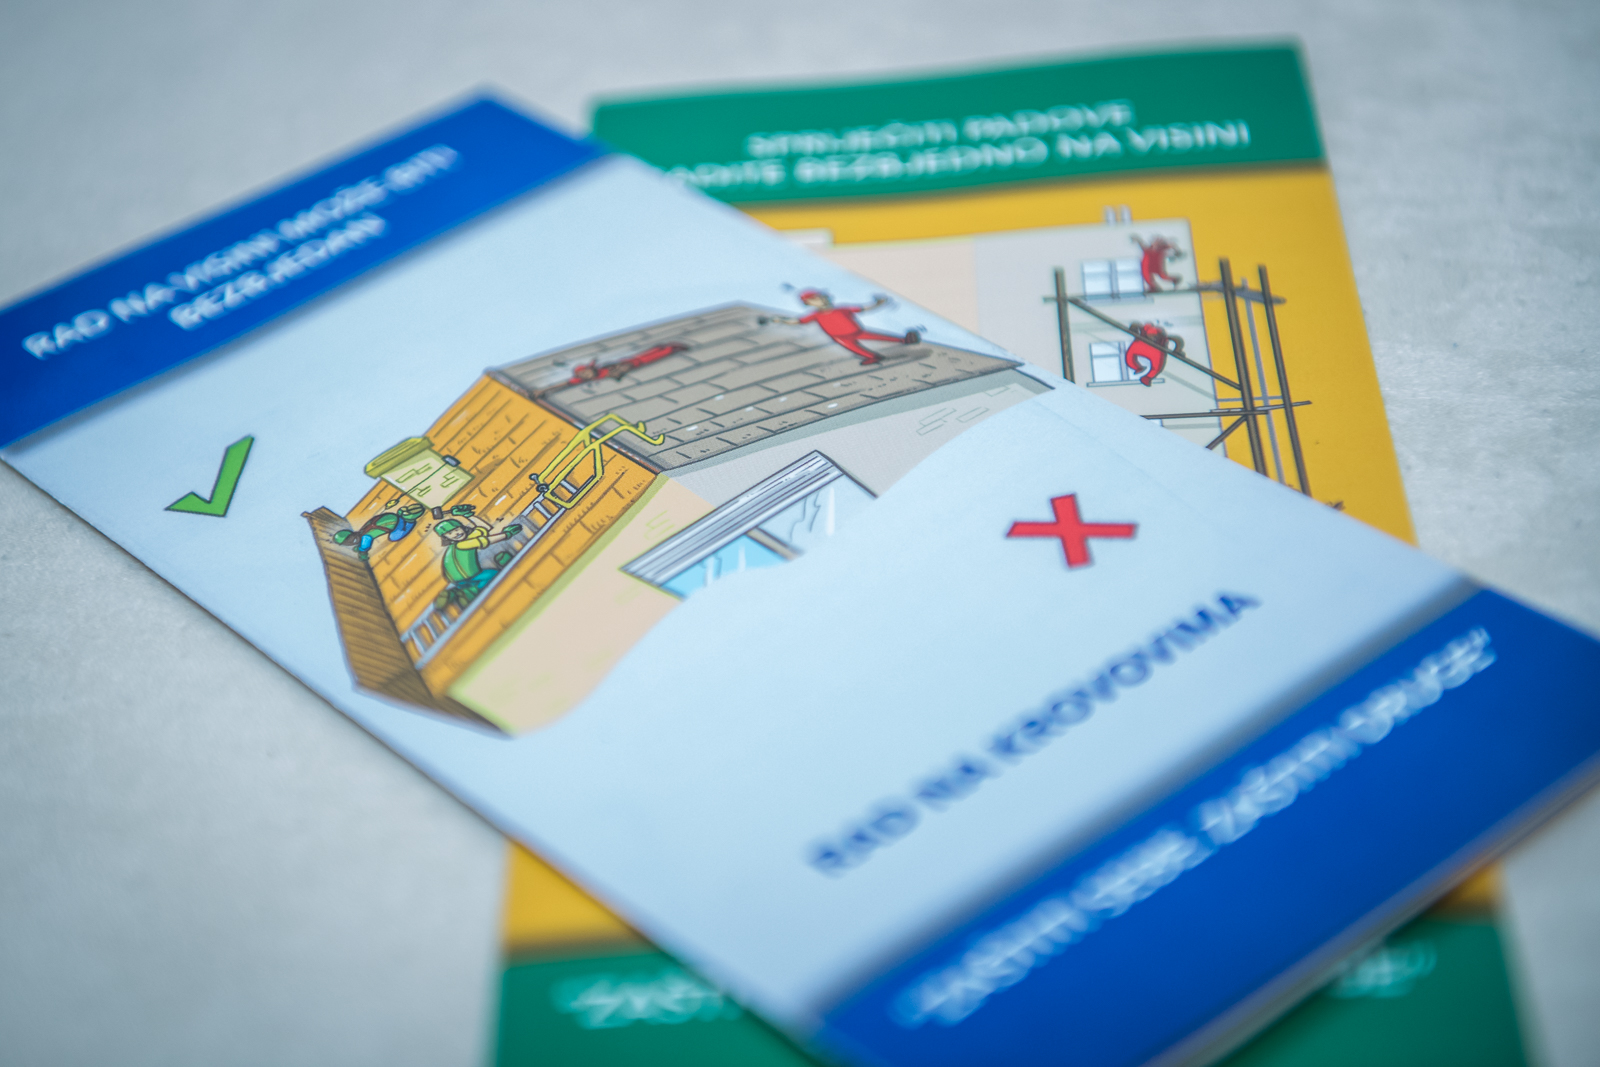 Labour Inspection campaign in the construction sector launched in Montenegro 27 February 2018